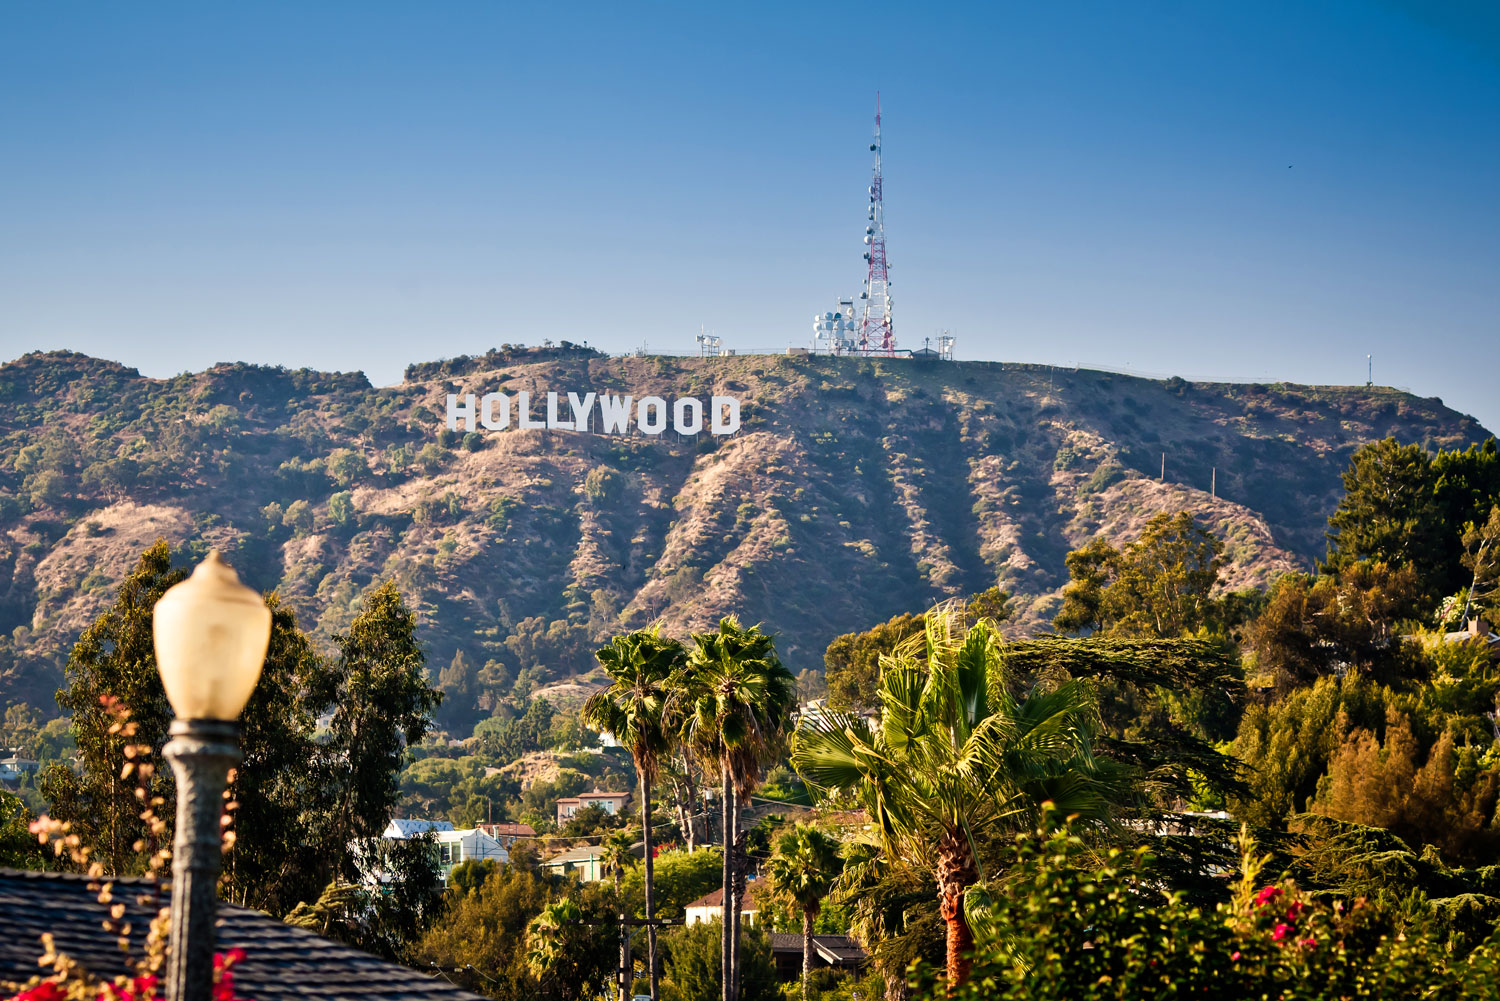 Los Angeles - the home of Hollywood.